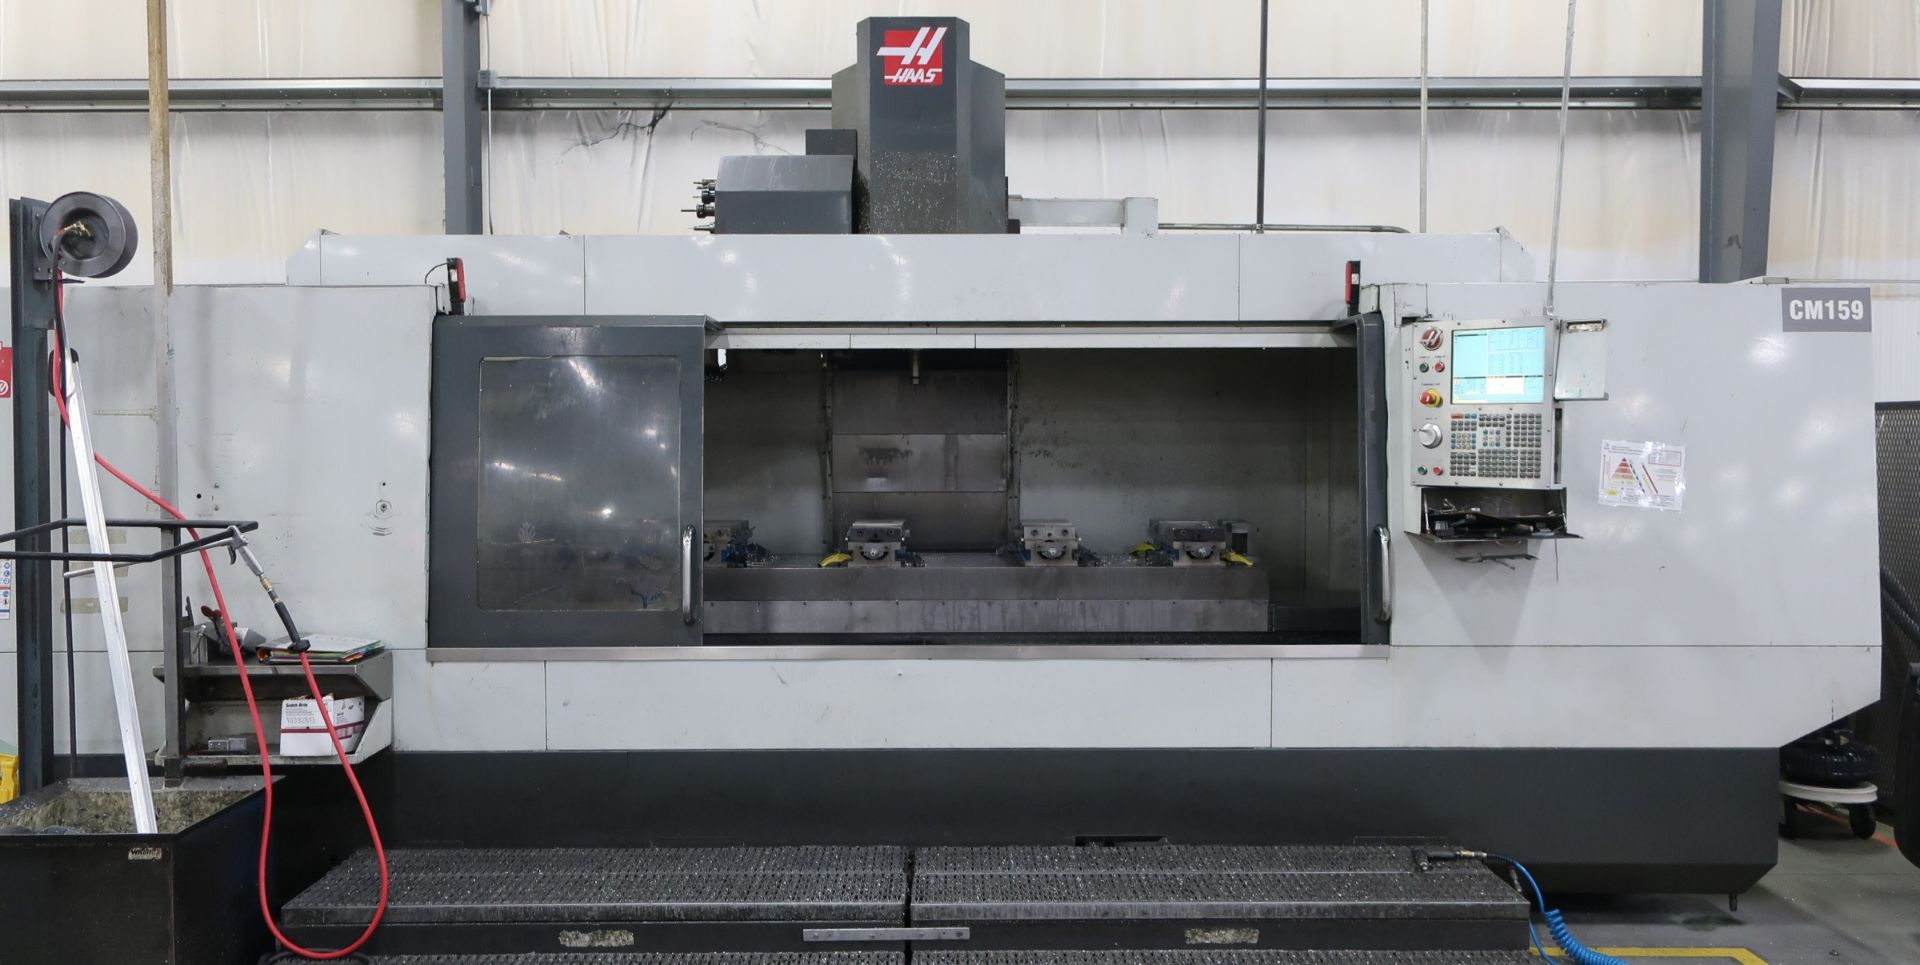 28" x 120" HAAS VF10/40 CNC VERTICAL MACHINING CENTER, NEW 2013 - Image 4 of 21